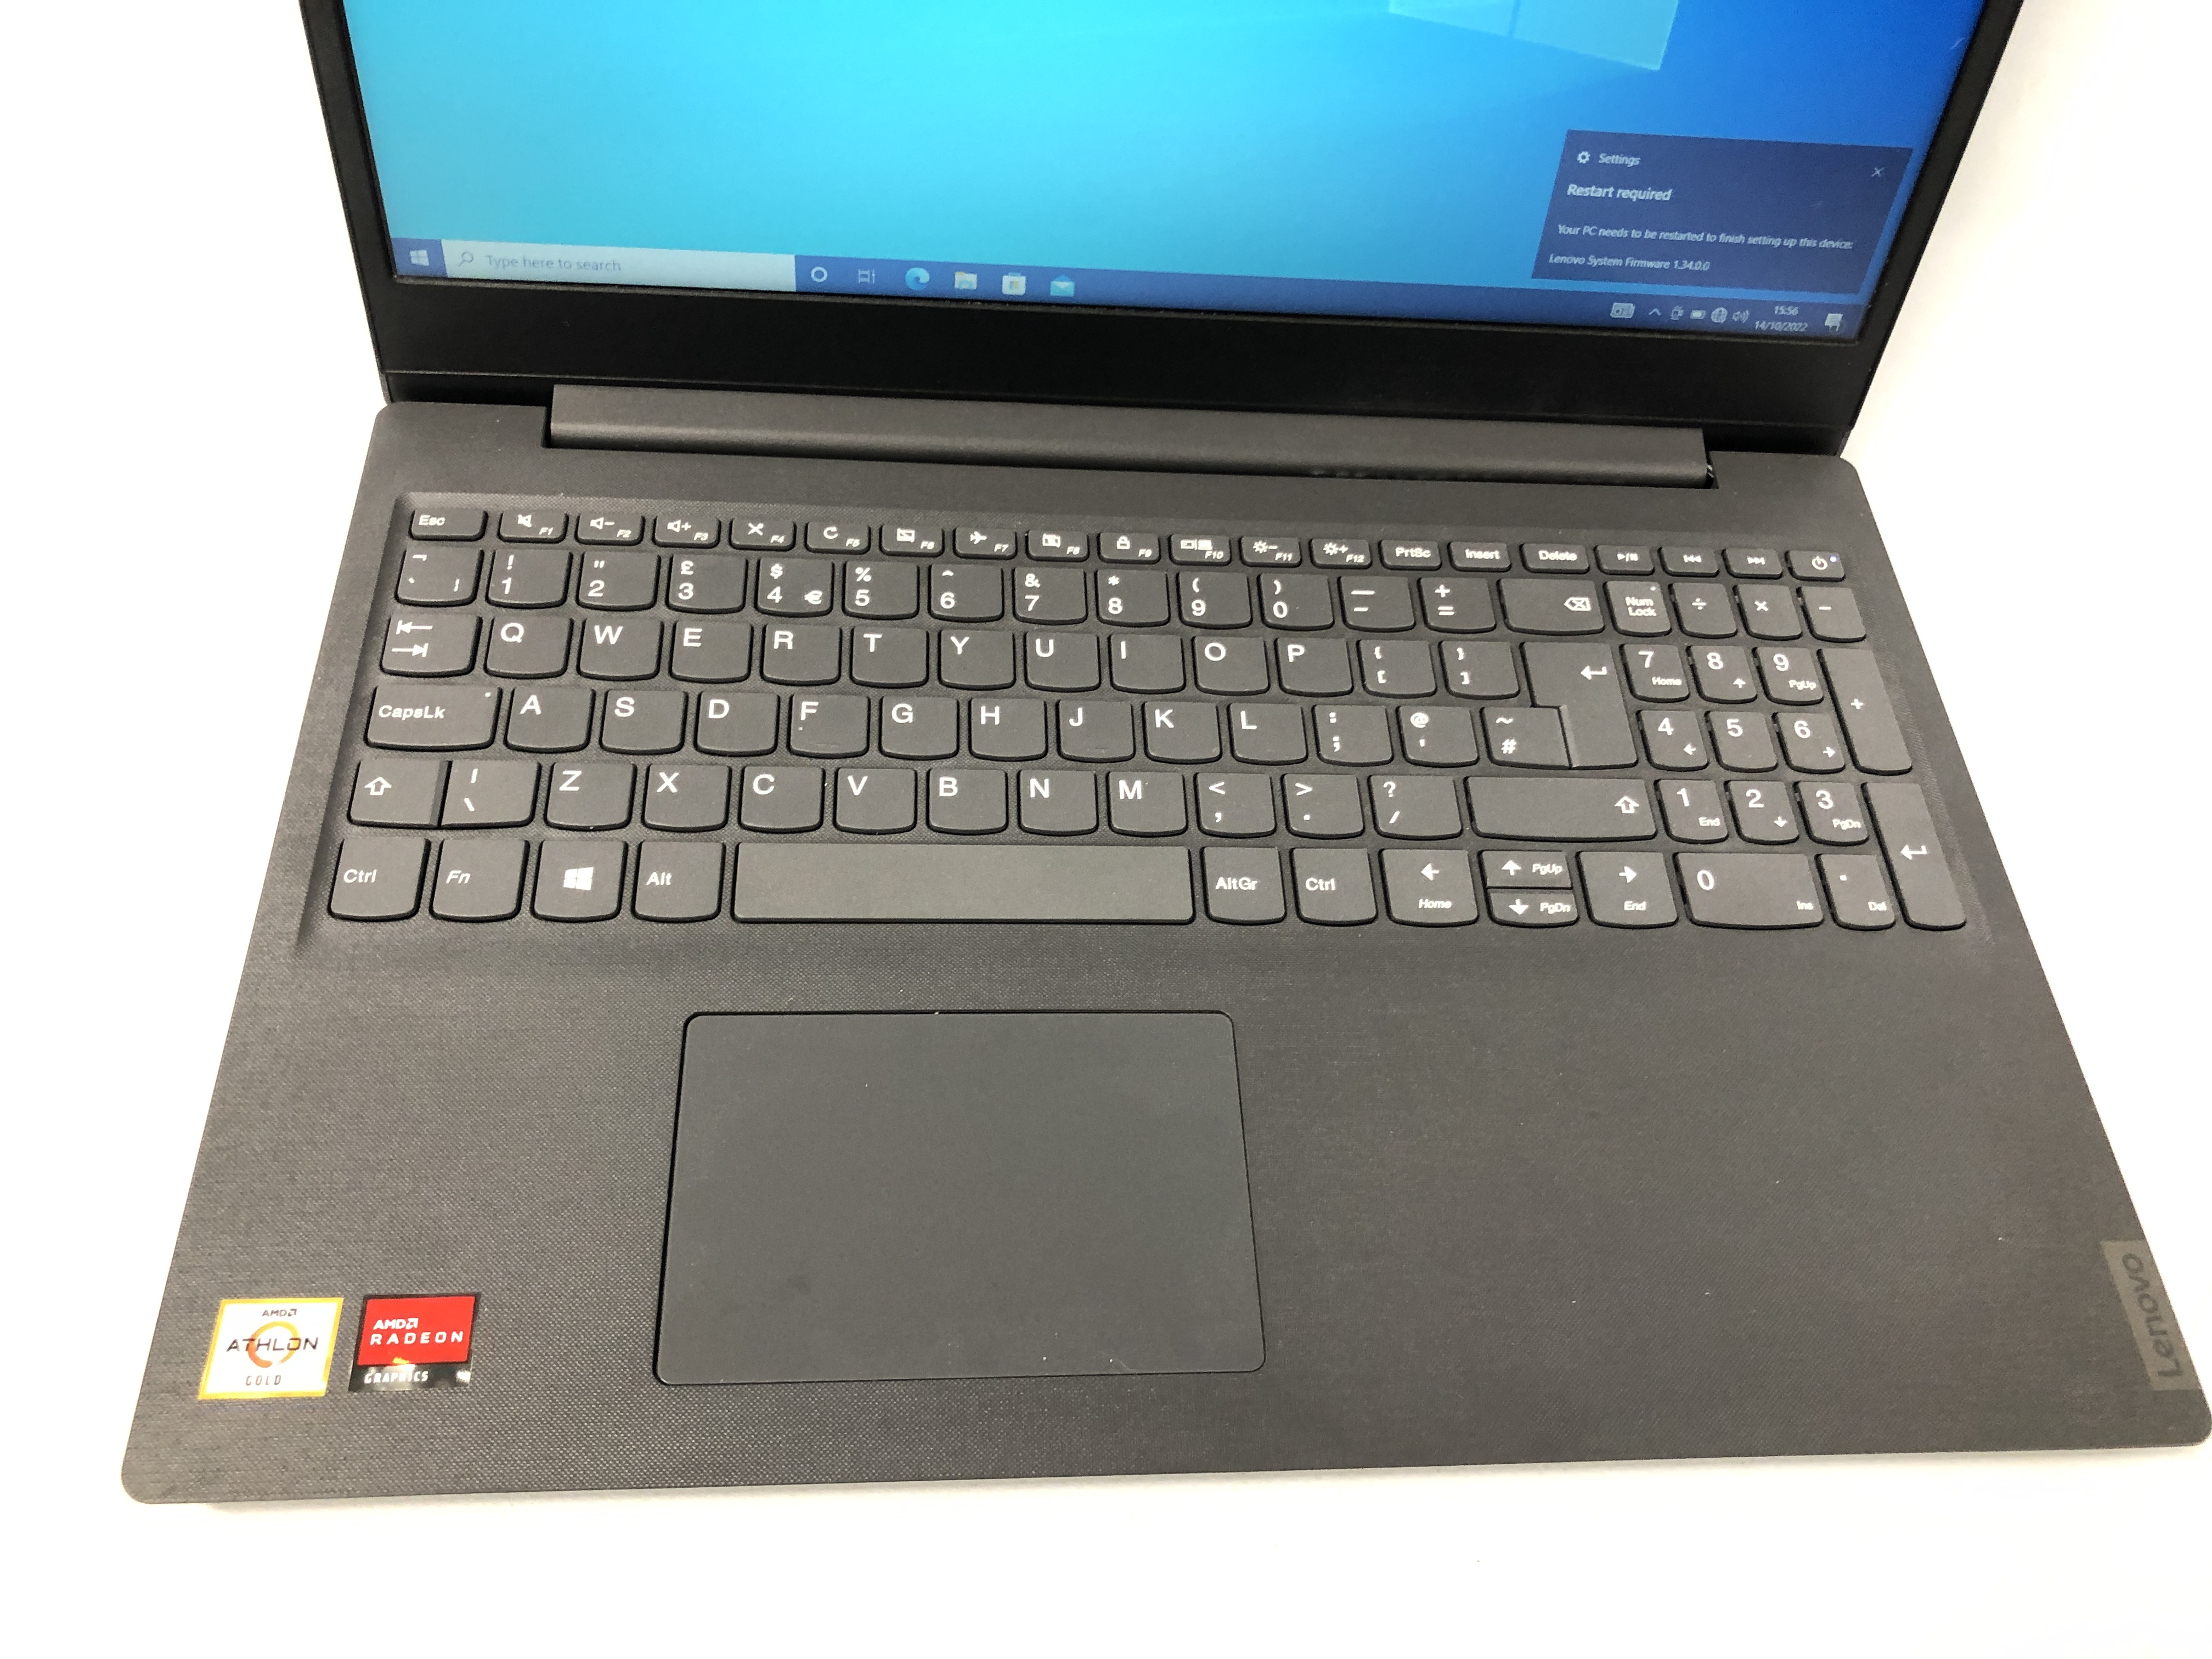 LENOVO LAPTOP COMPUTER MODEL 82C7, WINDOWS 10 (NO CHARGER) - SOLD AS SEEN. - Image 2 of 4